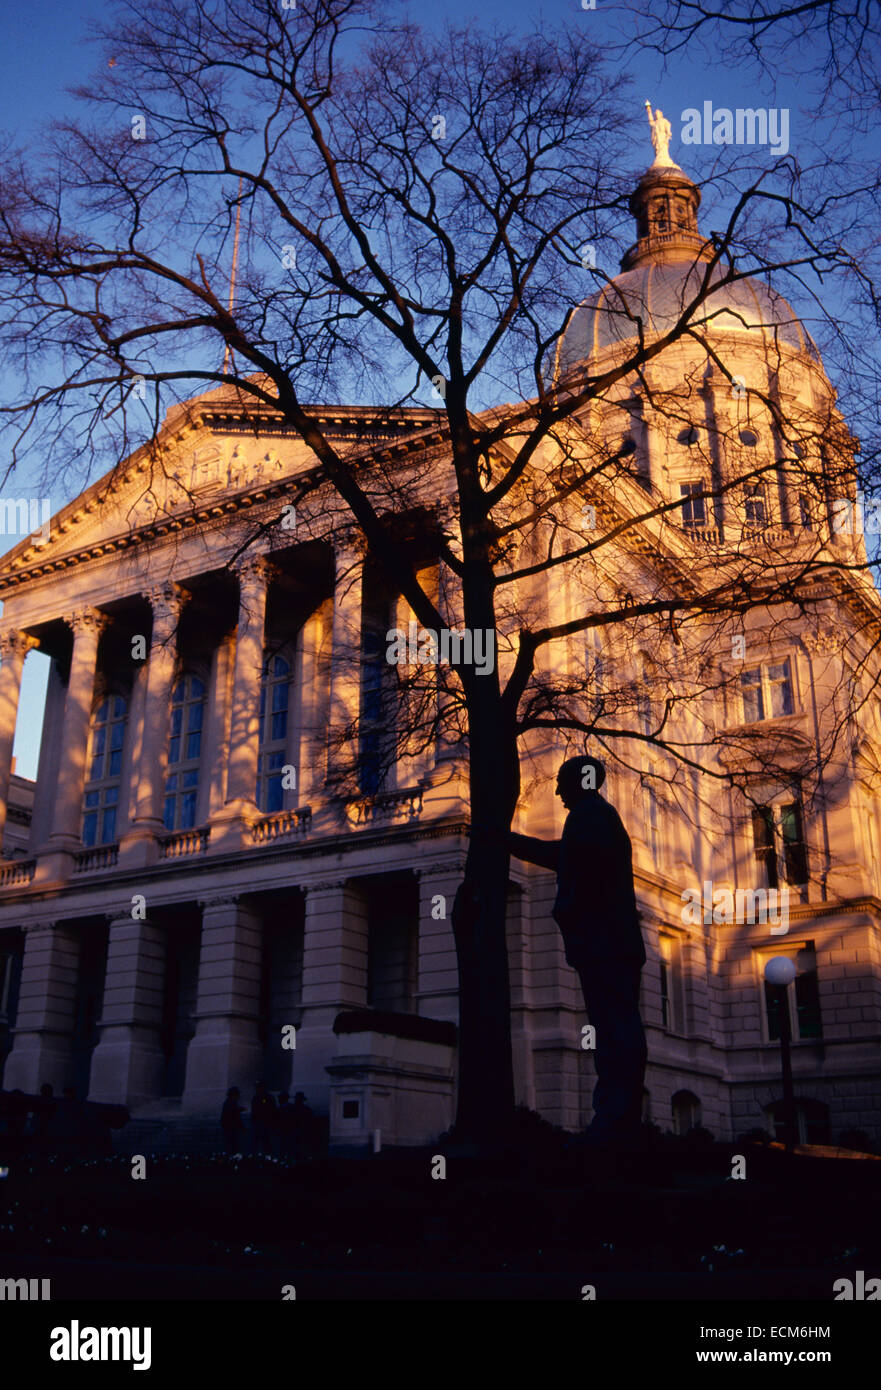 The Georgia state capitol in late afternoon winter light. A statue honoring Senator Richard Russell stands in front. Stock Photo